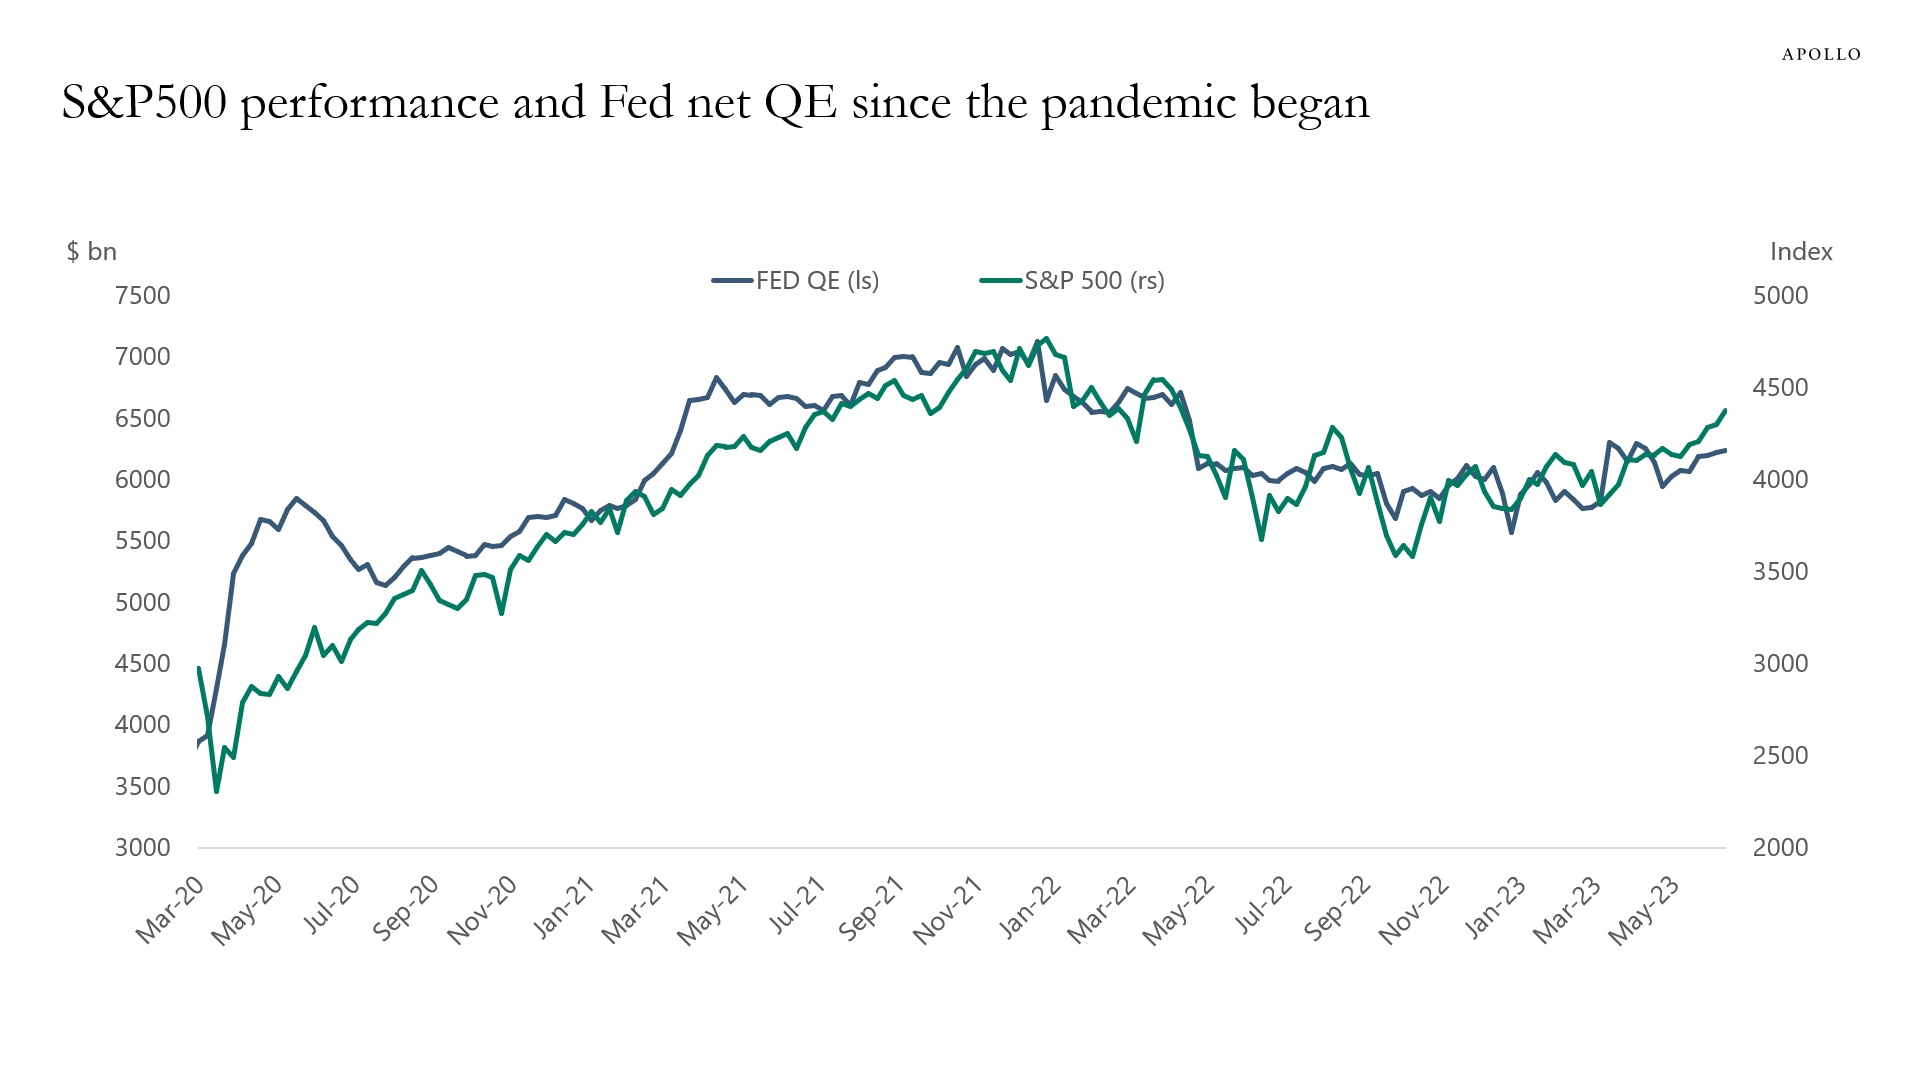 S&P500 performance and Fed QE